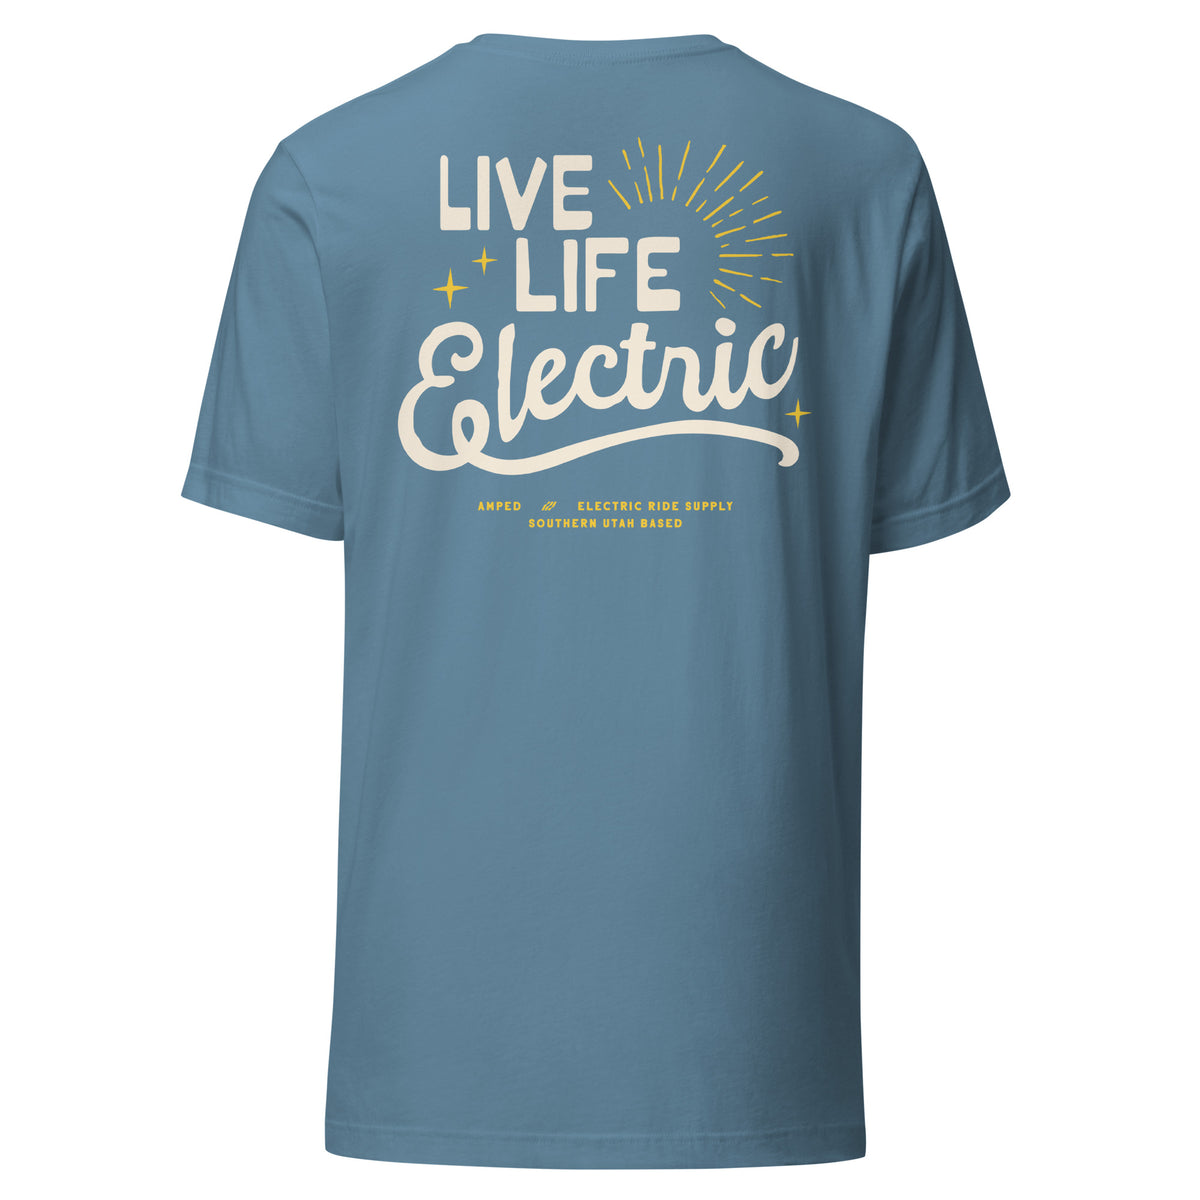 The Live Life Electric Tee